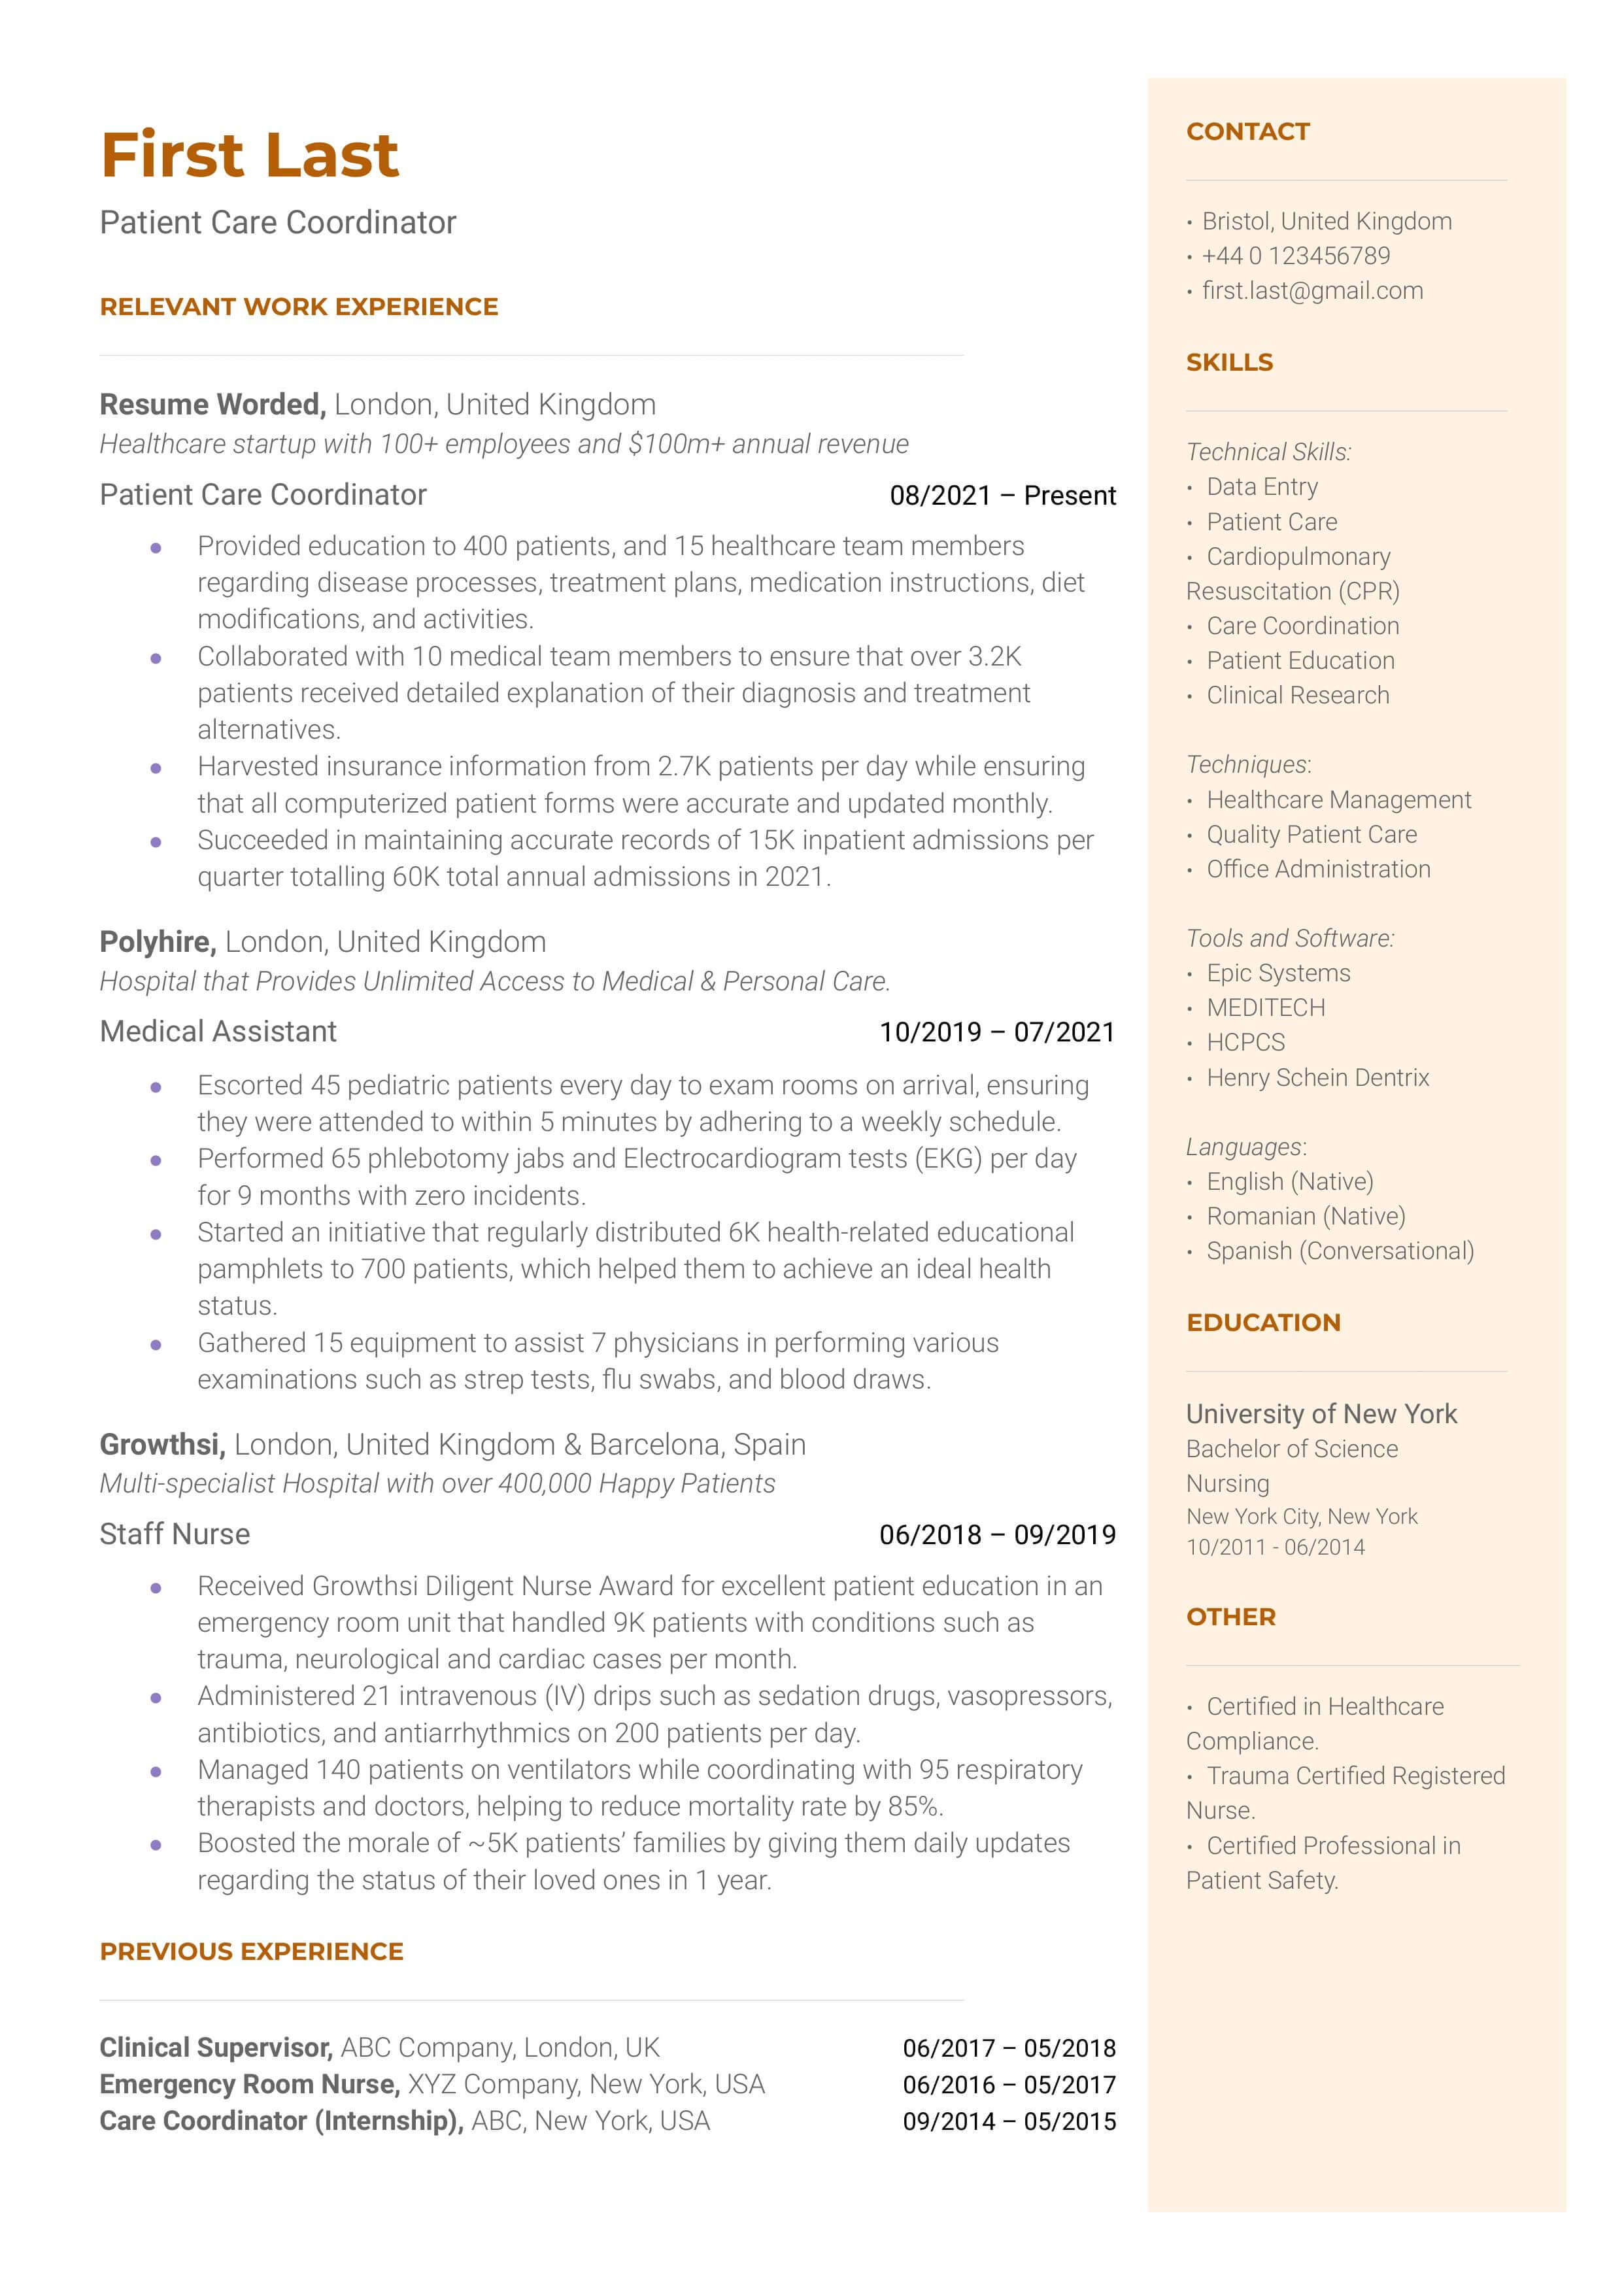 A CV screenshot for a Patient Care Coordinator role, focusing on digital literacy and patient advocacy.